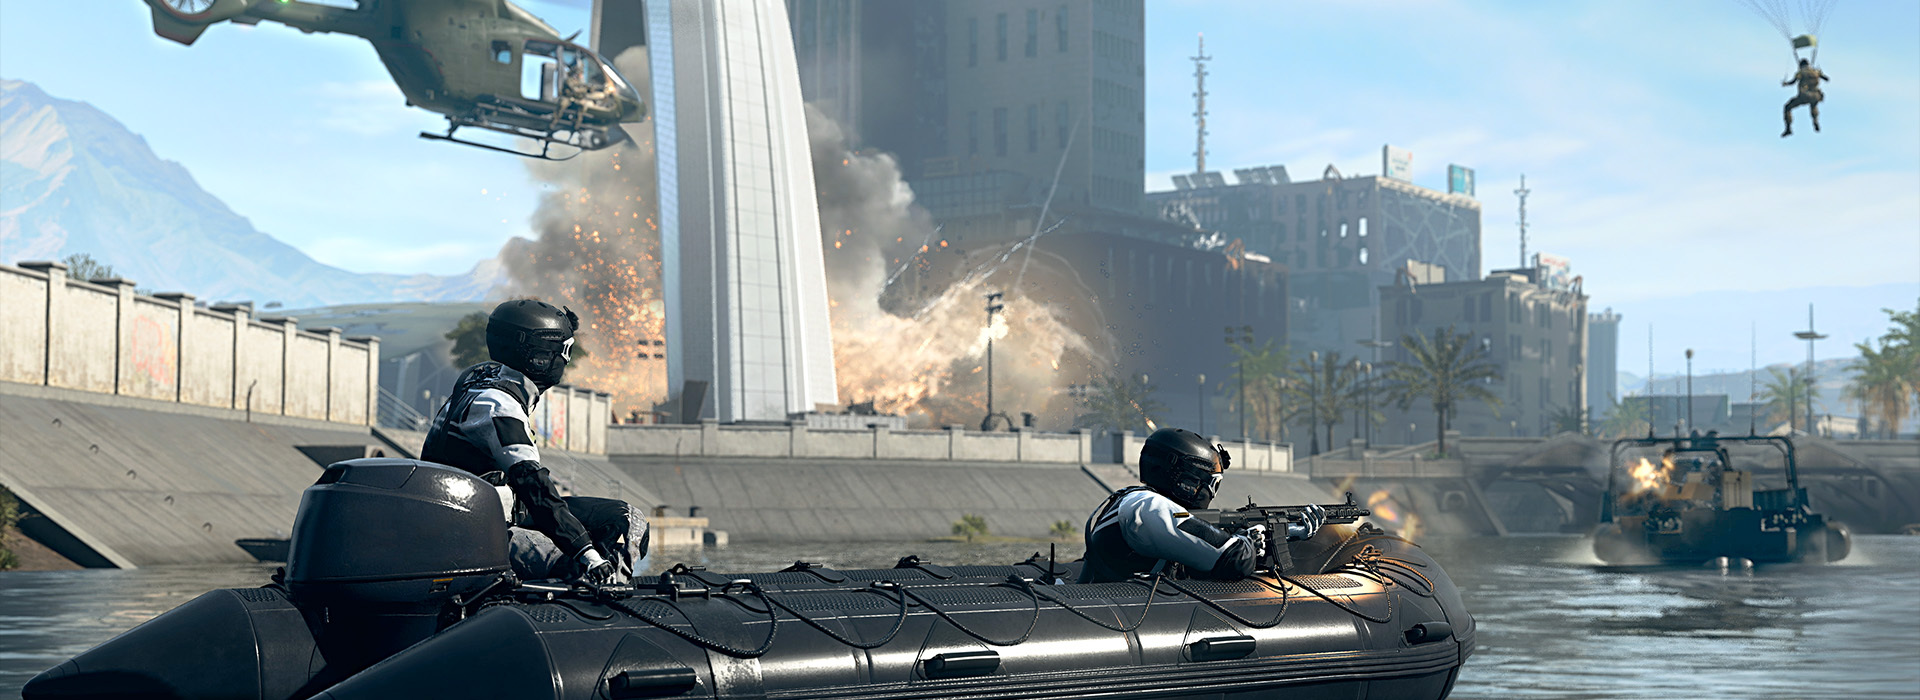 Battlefield 3 Battle Royale Mod Map, Ping, Loot System and More